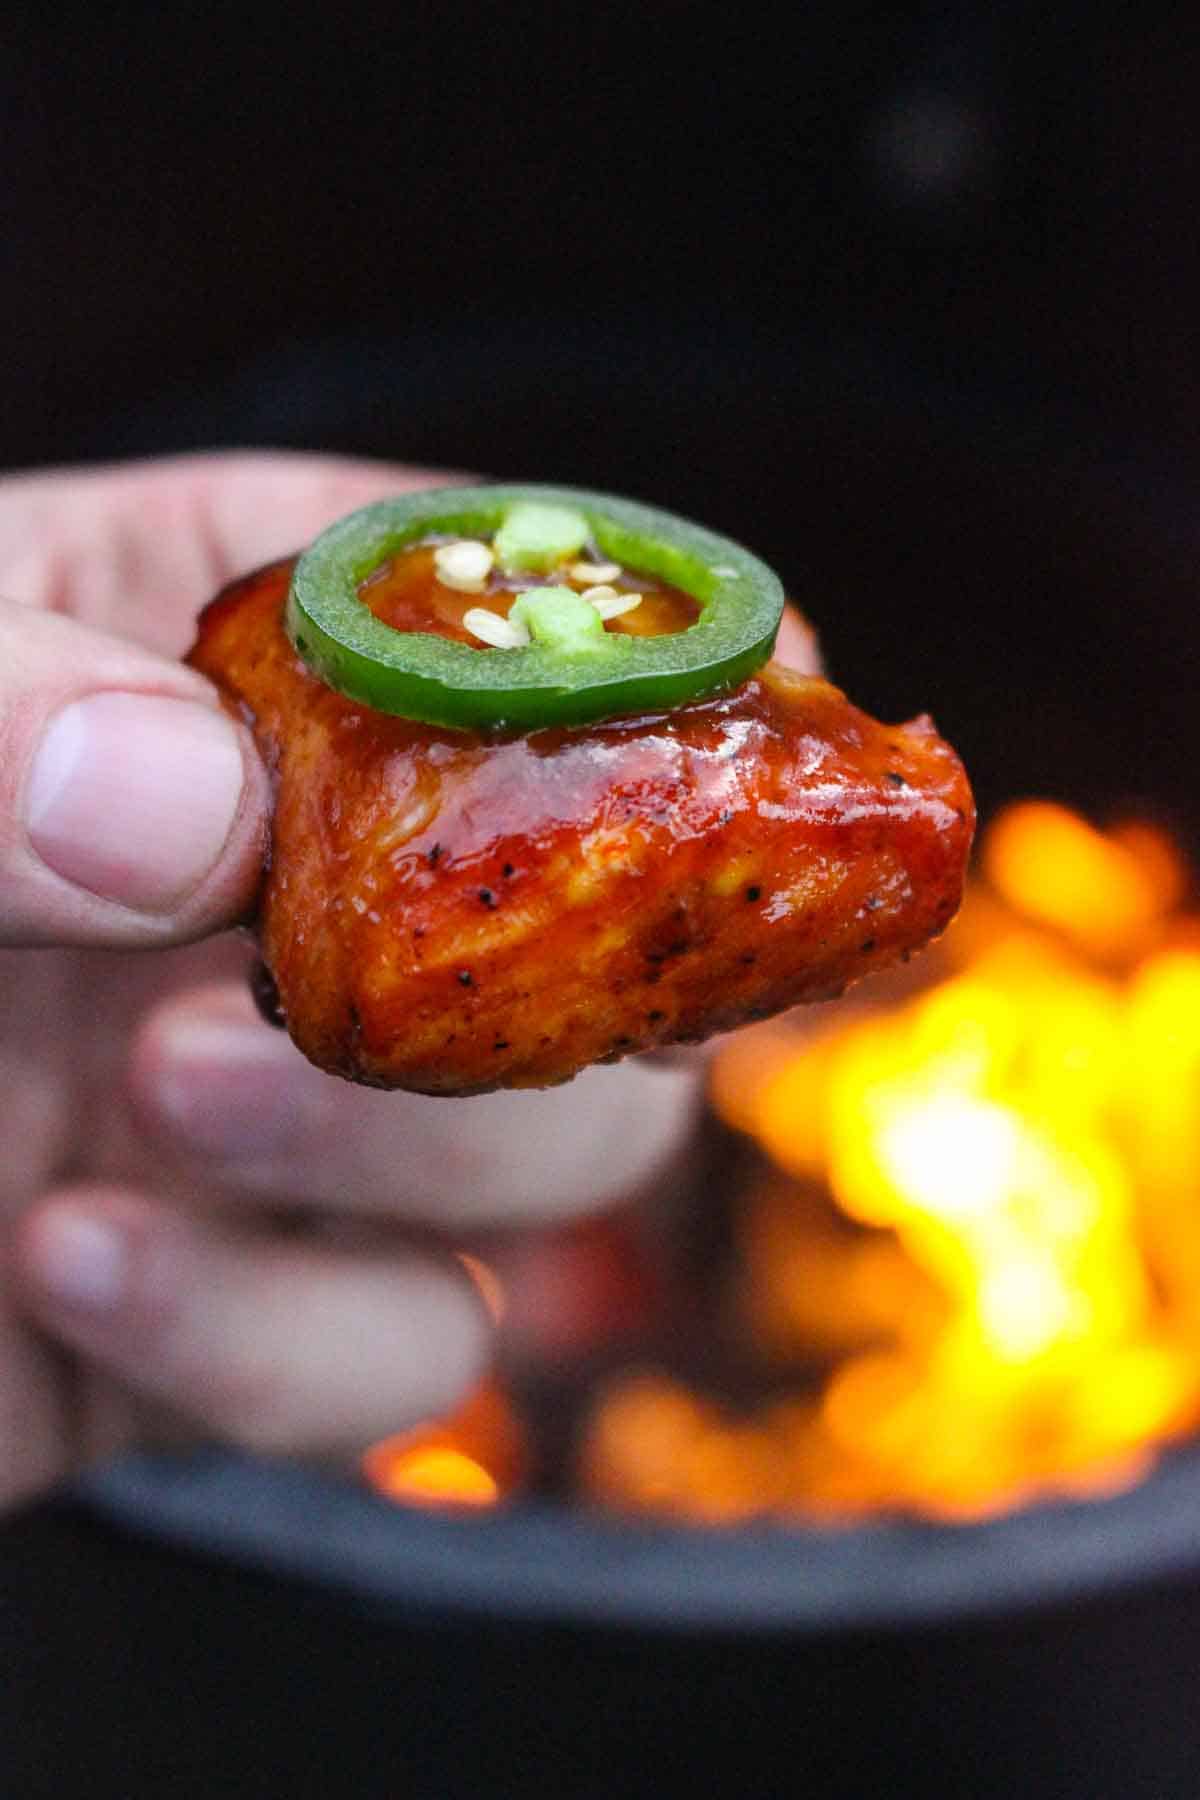 One of the Maple Bacon Bourbon Salmon Bites being held close to the camera with the fire in the background.